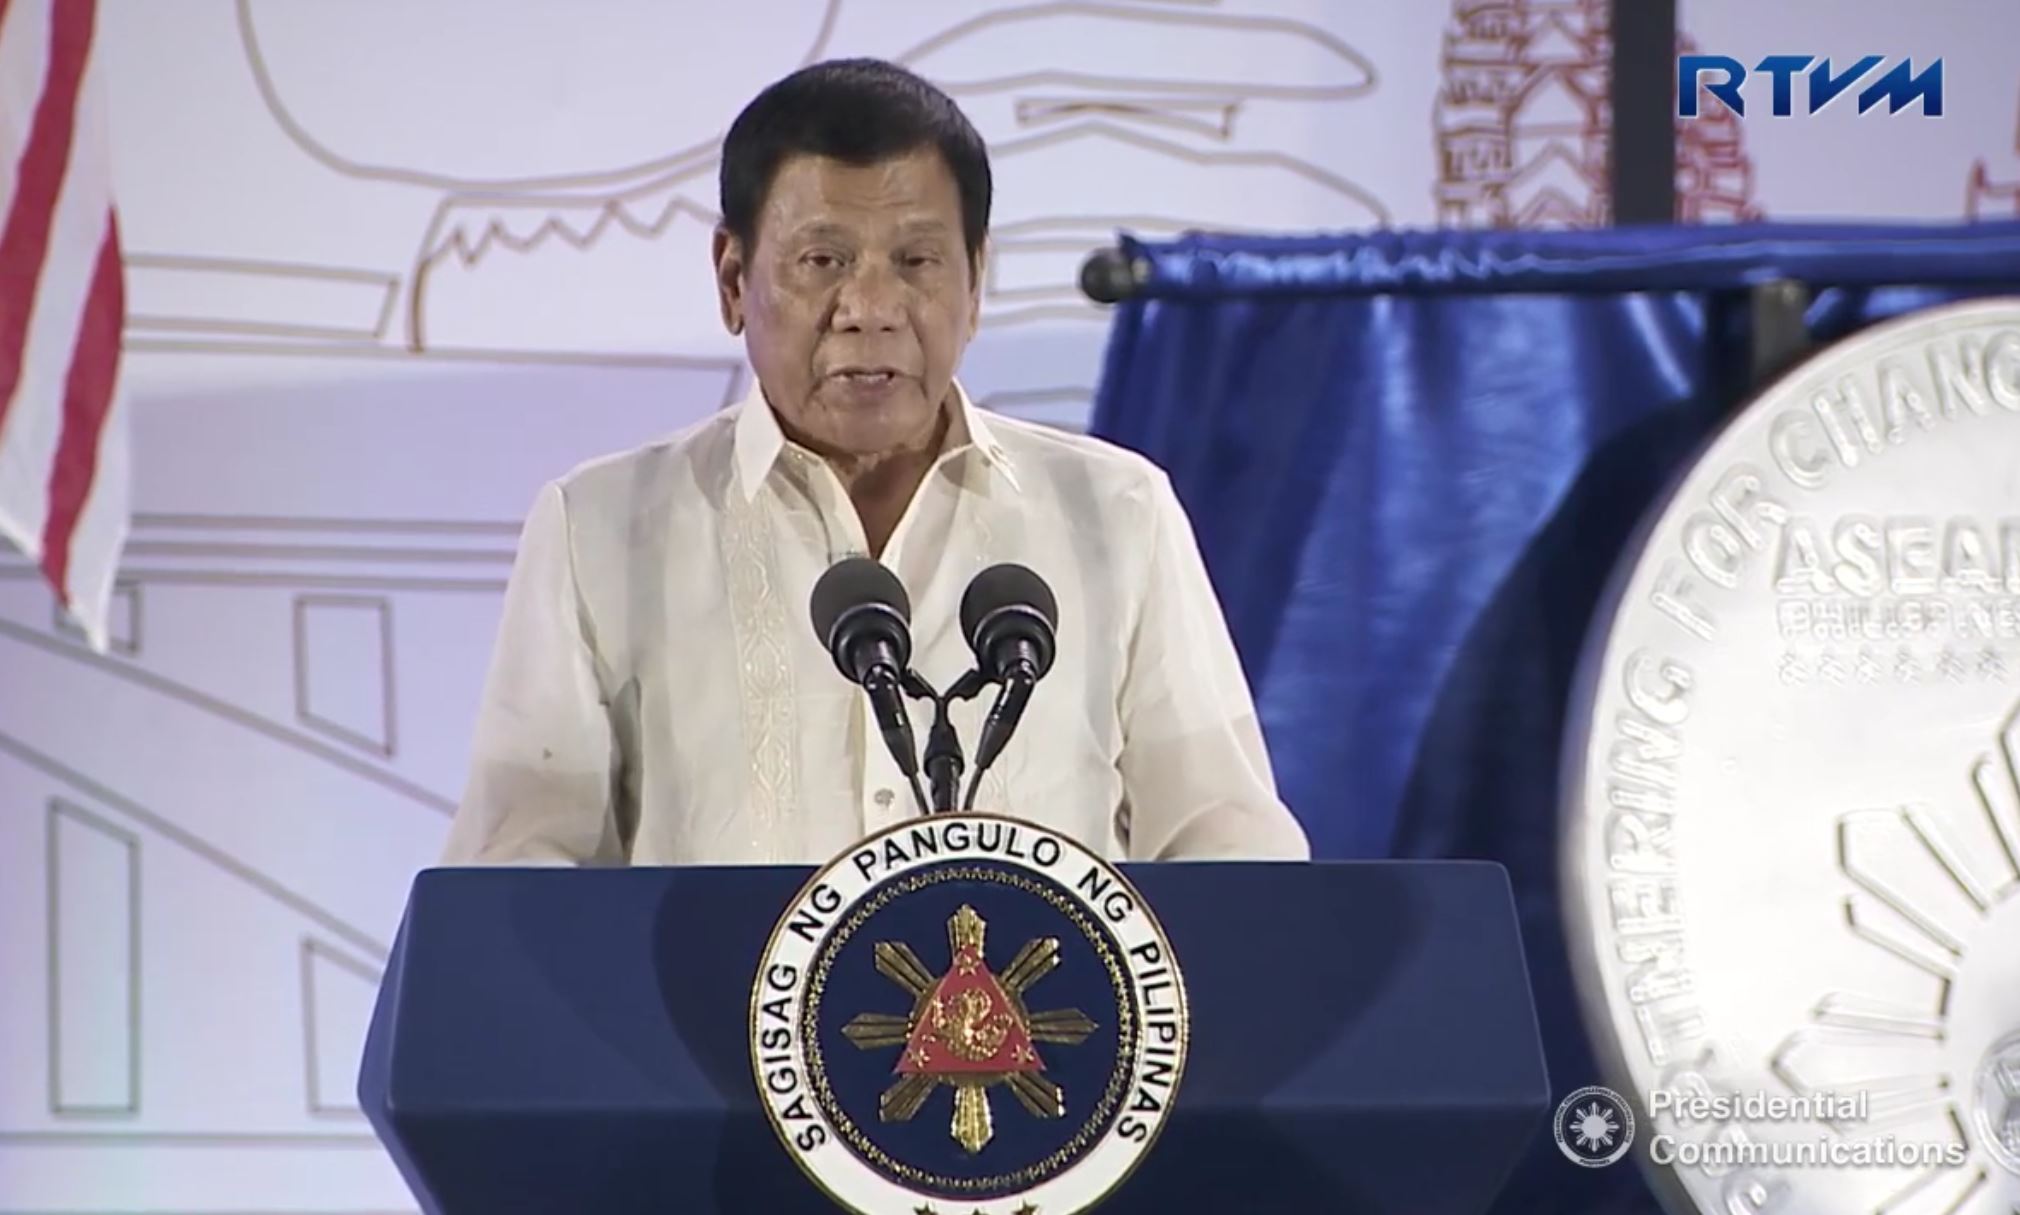 Philippine president Rodrigo Duterte speaking at the launch of the ASEAN chairmanship of the Philippines at the SMX Convention Center in Davao City on January 15. (Photo grabbed from RTVM video)